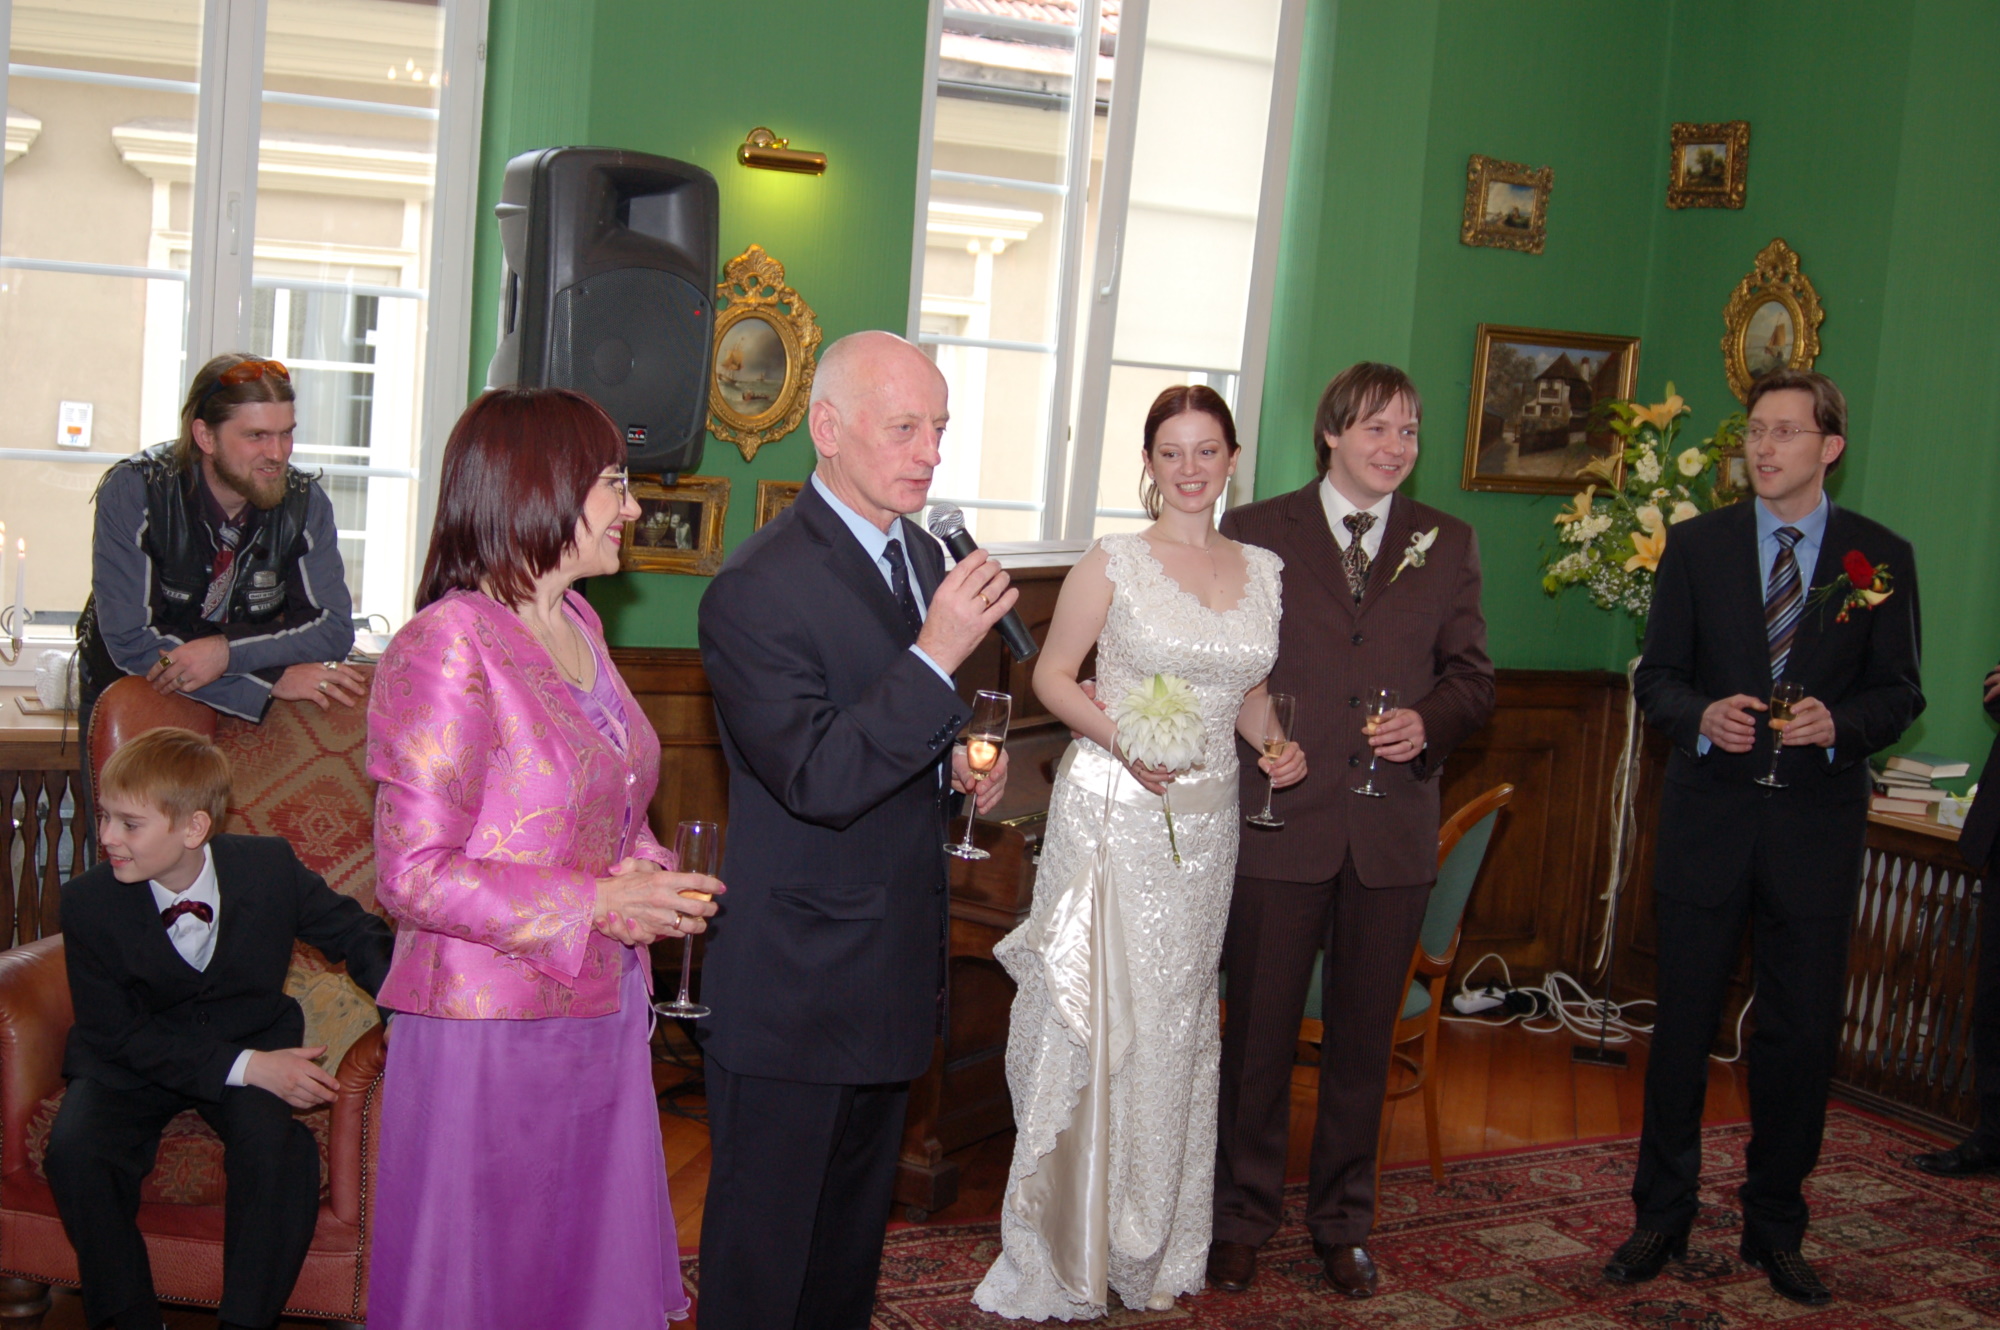 Mom and dad give a speech at the wedding reception